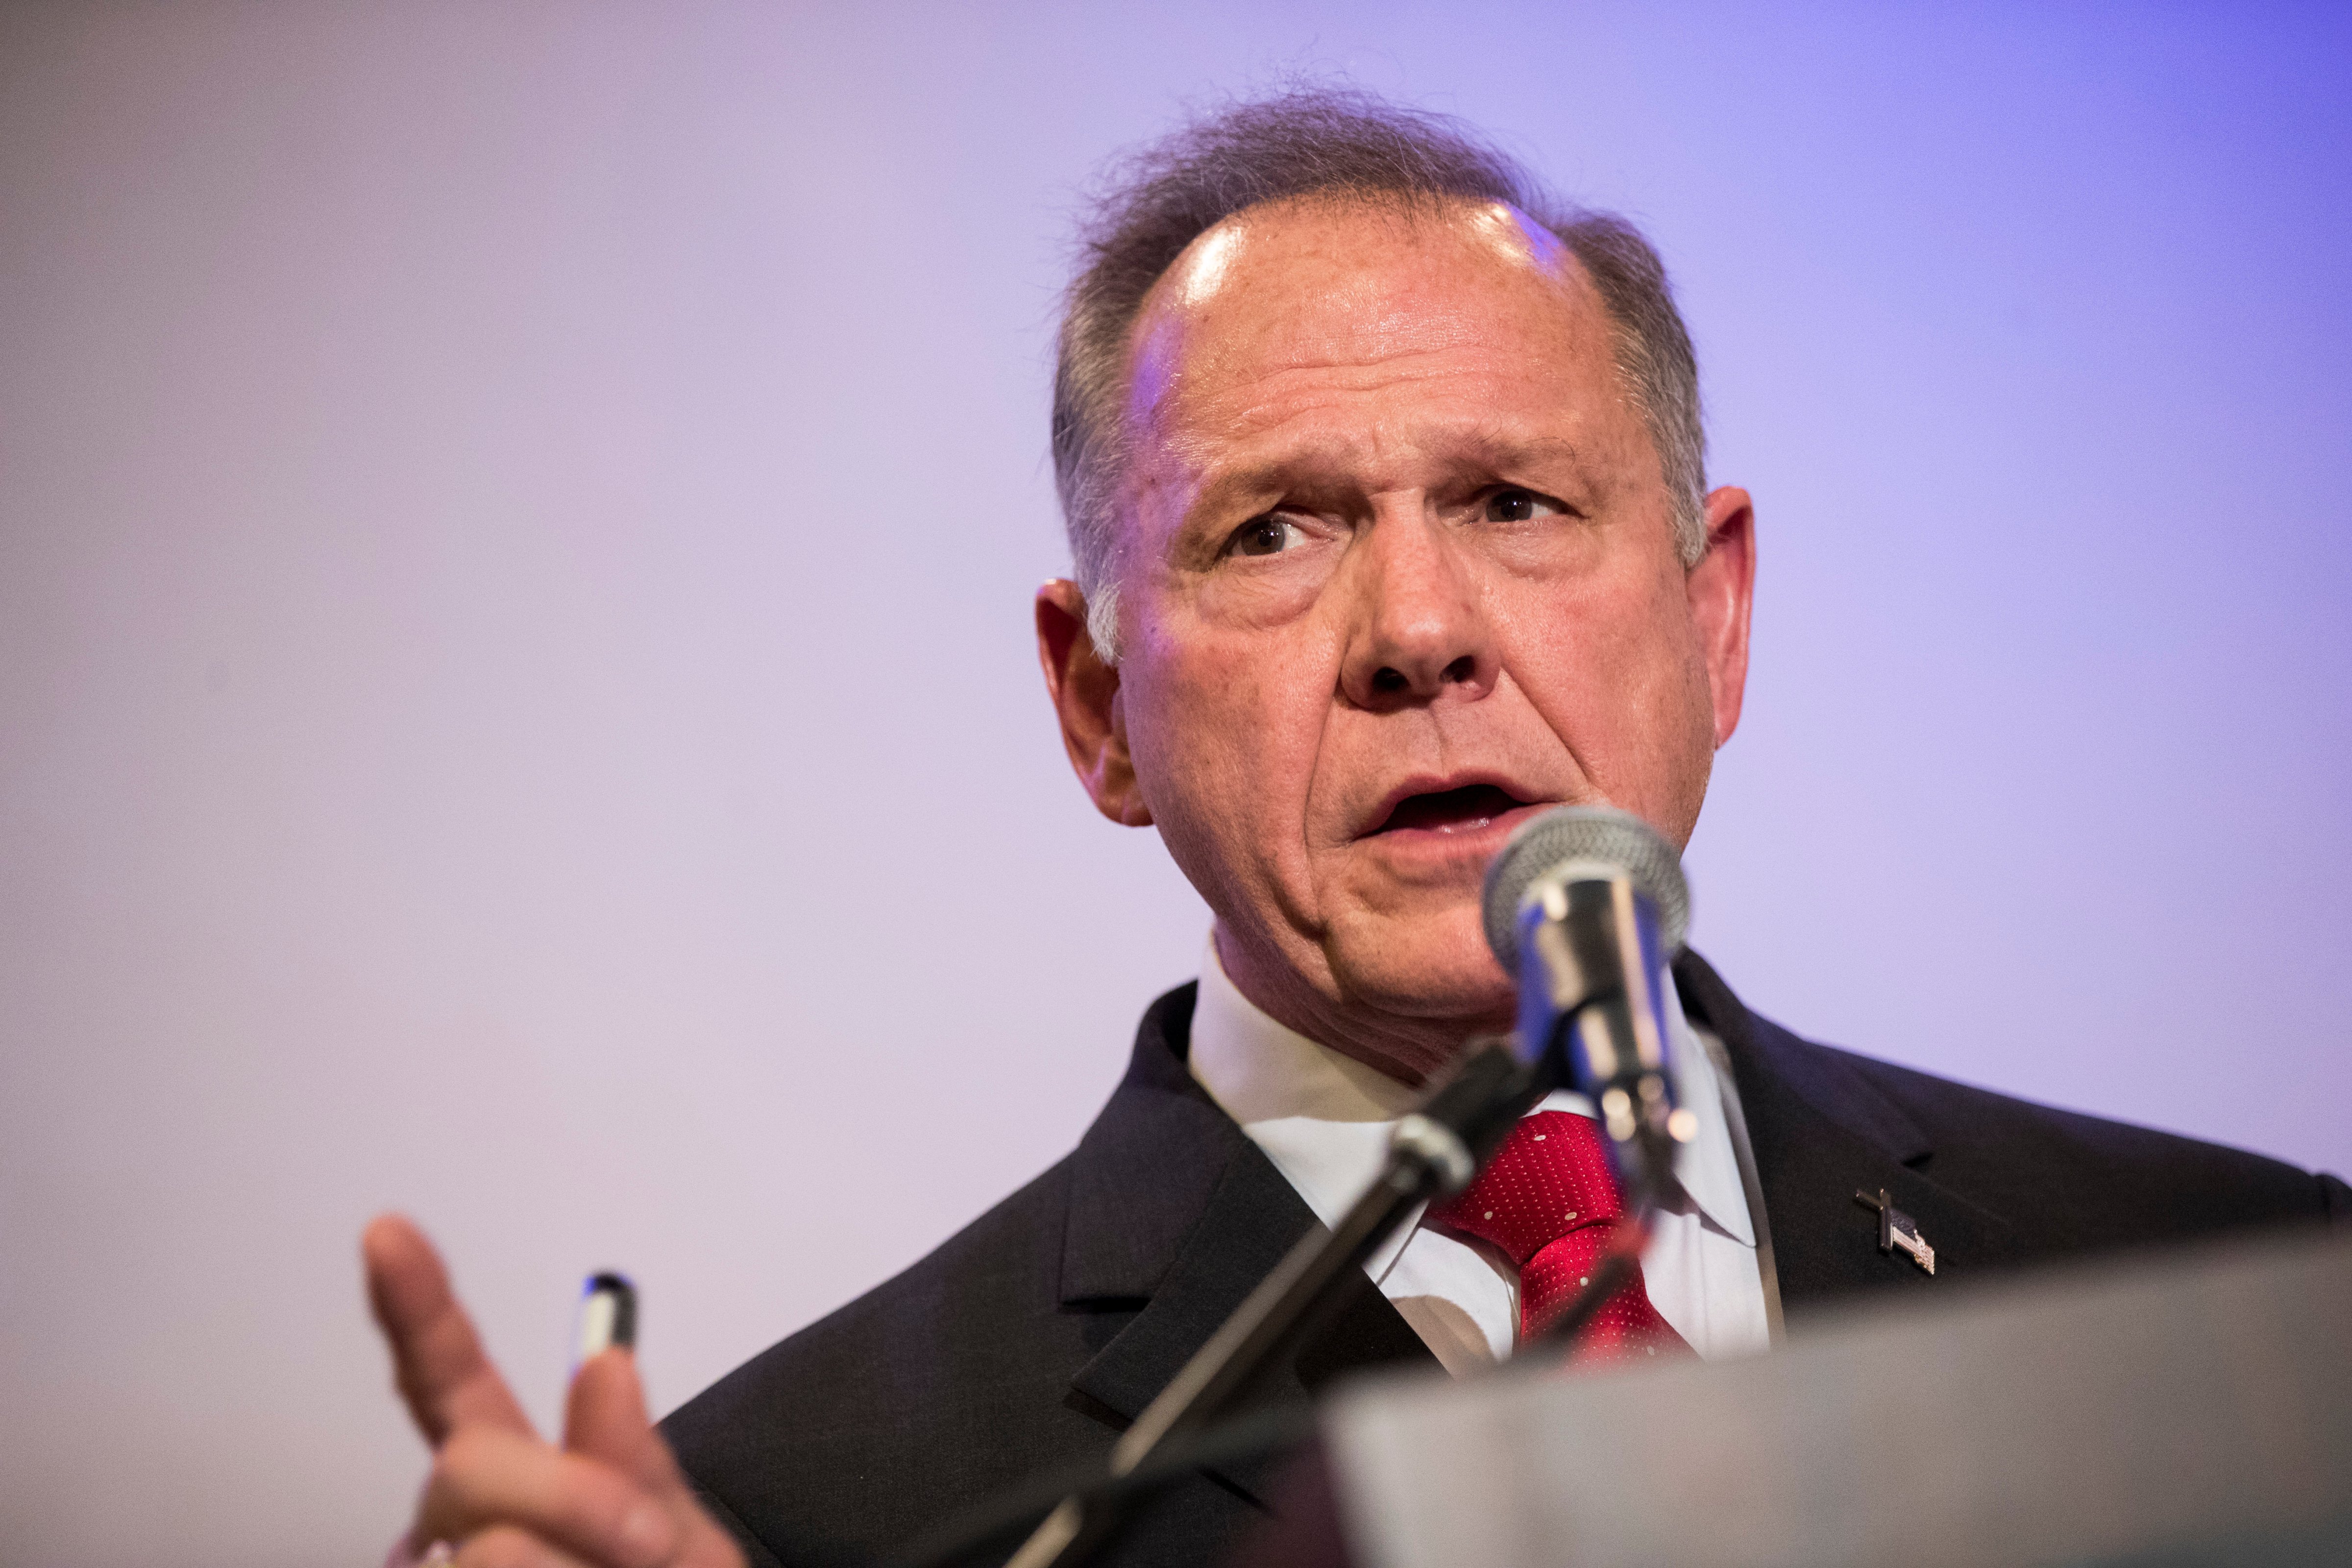 Republican candidate for Senate Judge Roy Moore speaks during a news conference in Birmingham, Ala. on Nov. 16, 2017 (Drew Angerer—Getty Images)